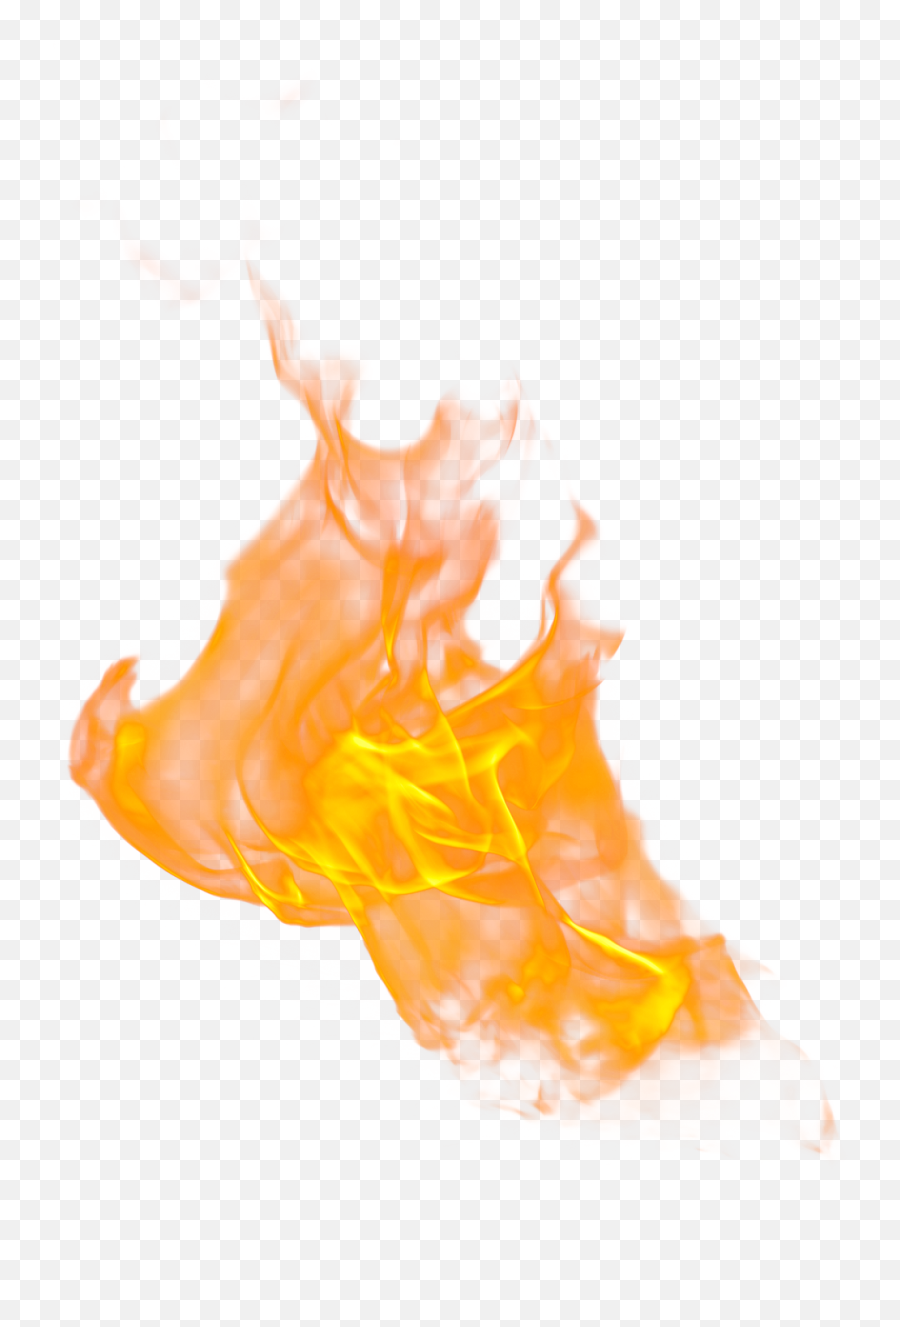 Fire Flame Png Image For Free Download - Portable Network Graphics,Flame Transparent